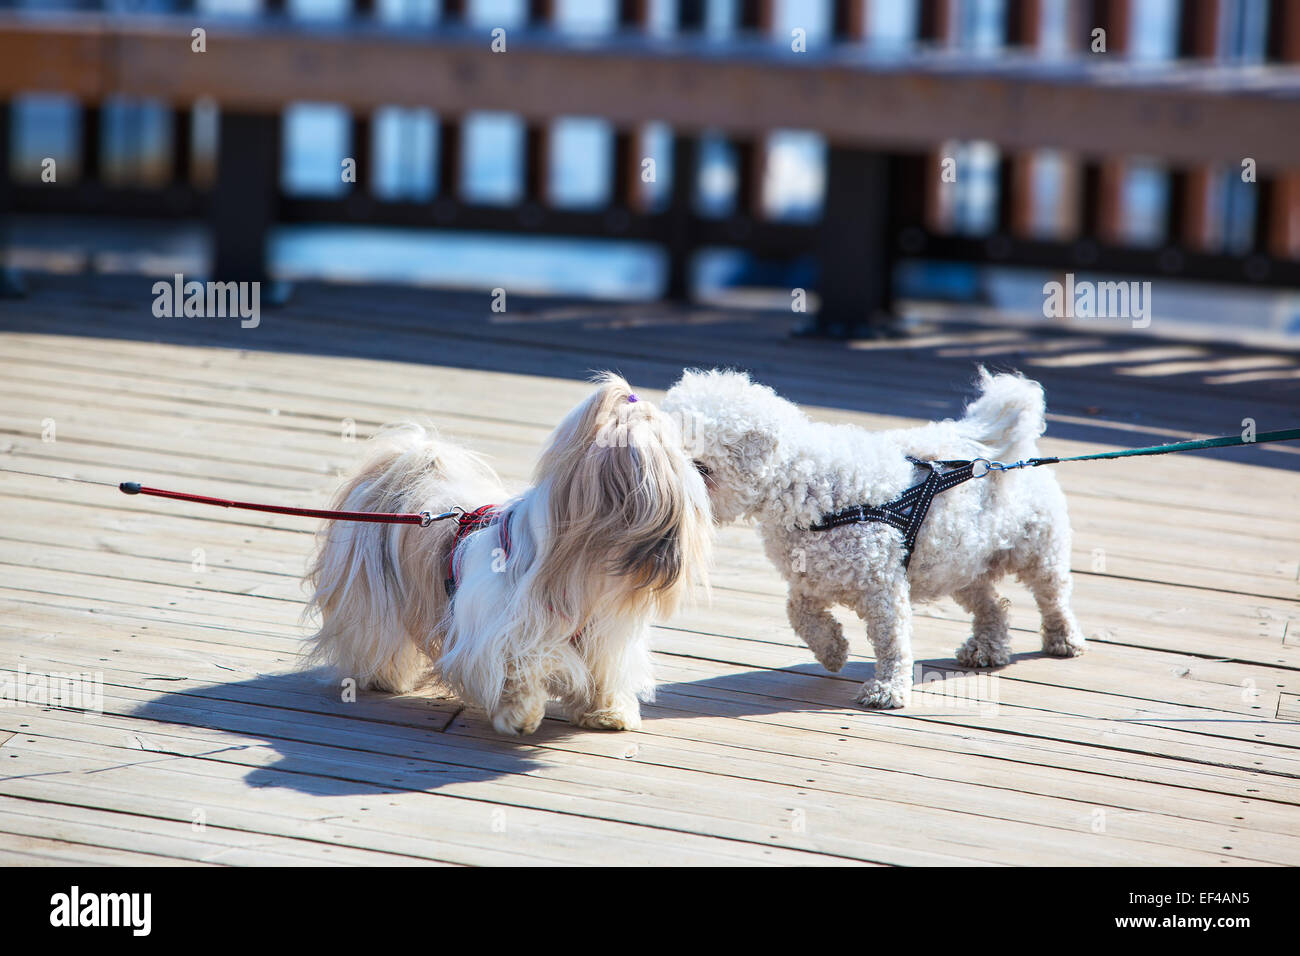 Two small dogs meeting on city street. Stock Photo